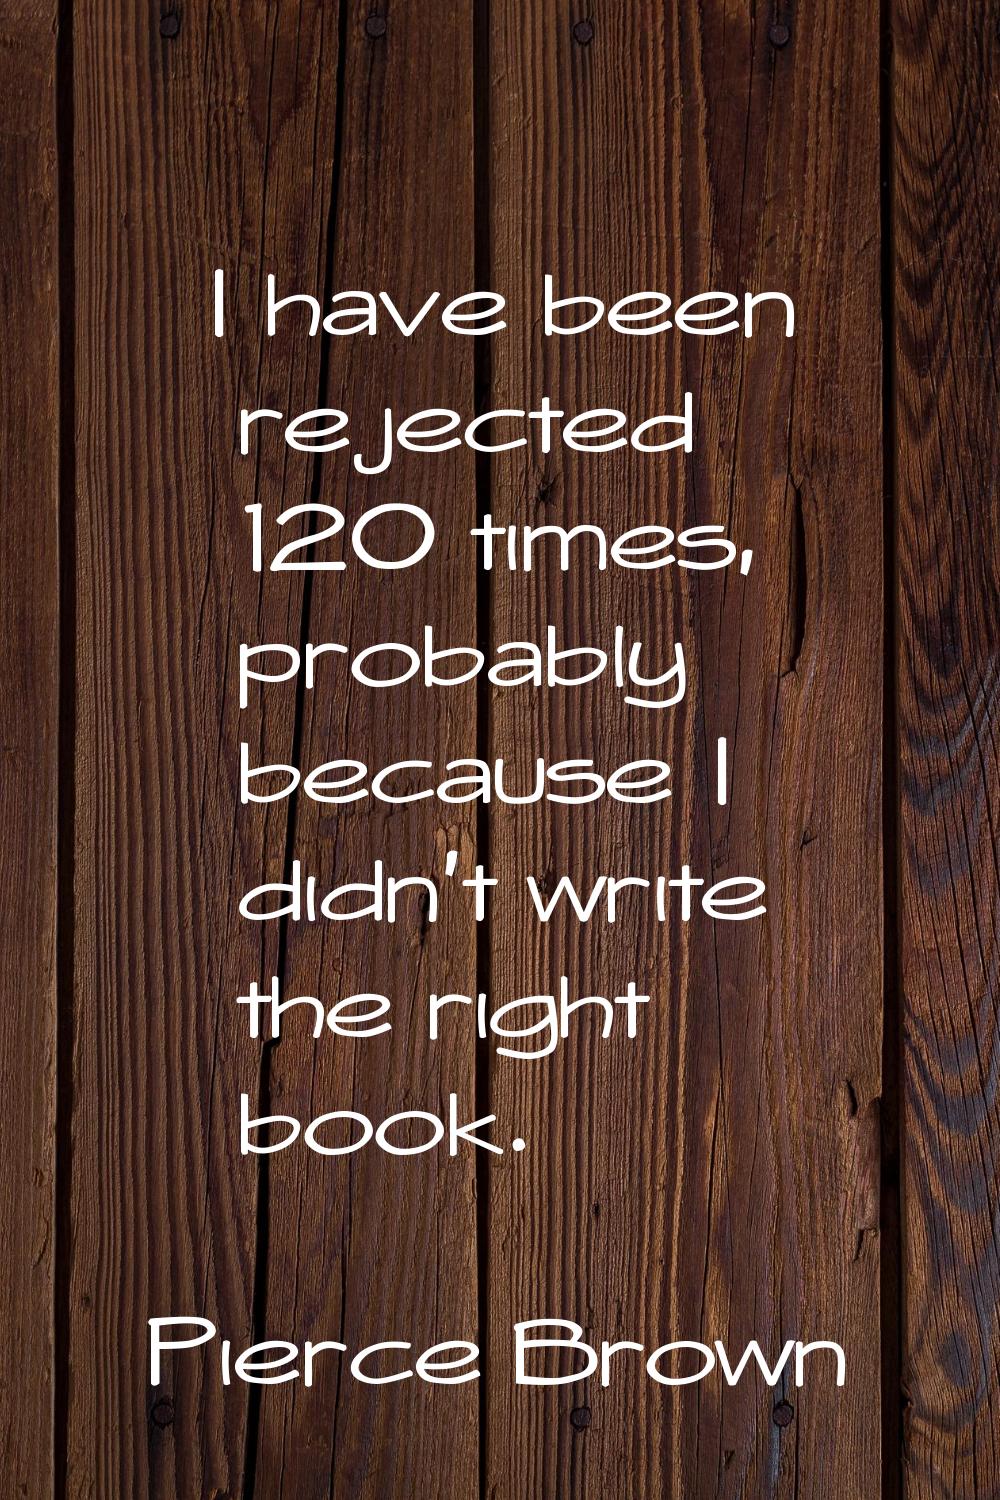 I have been rejected 120 times, probably because I didn't write the right book.